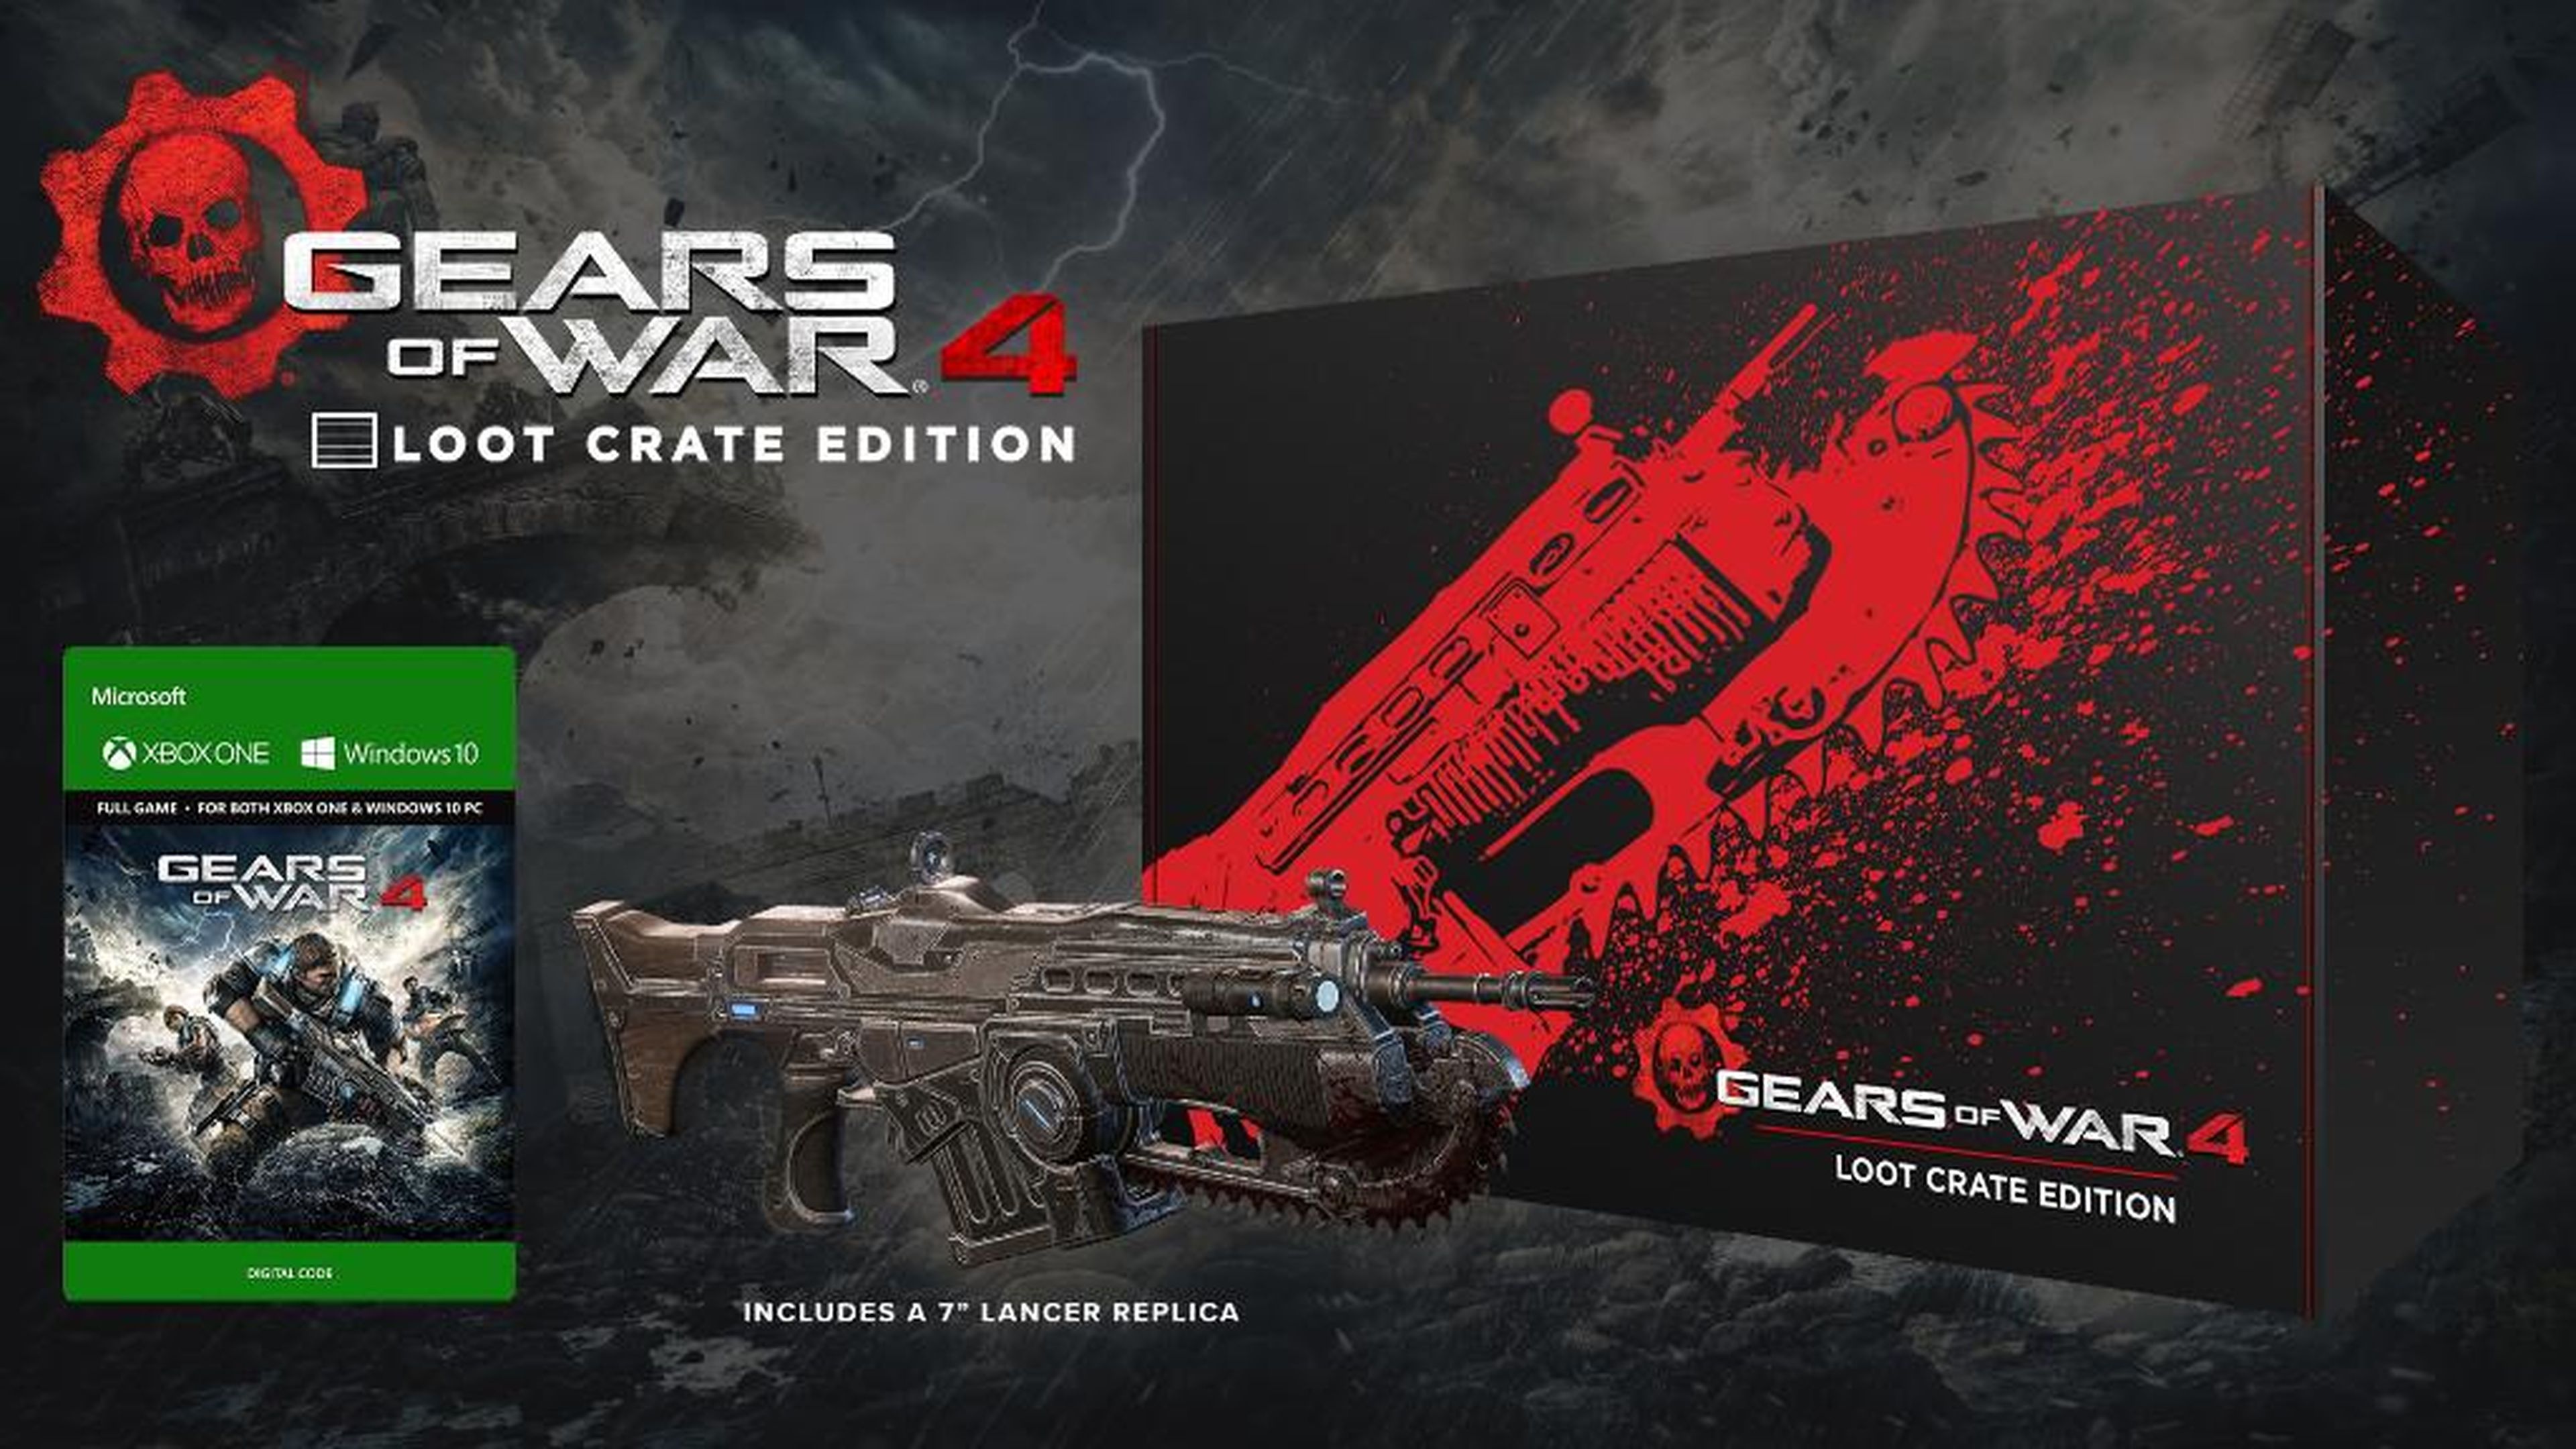 Gears of War 4 Loot Crate Edition